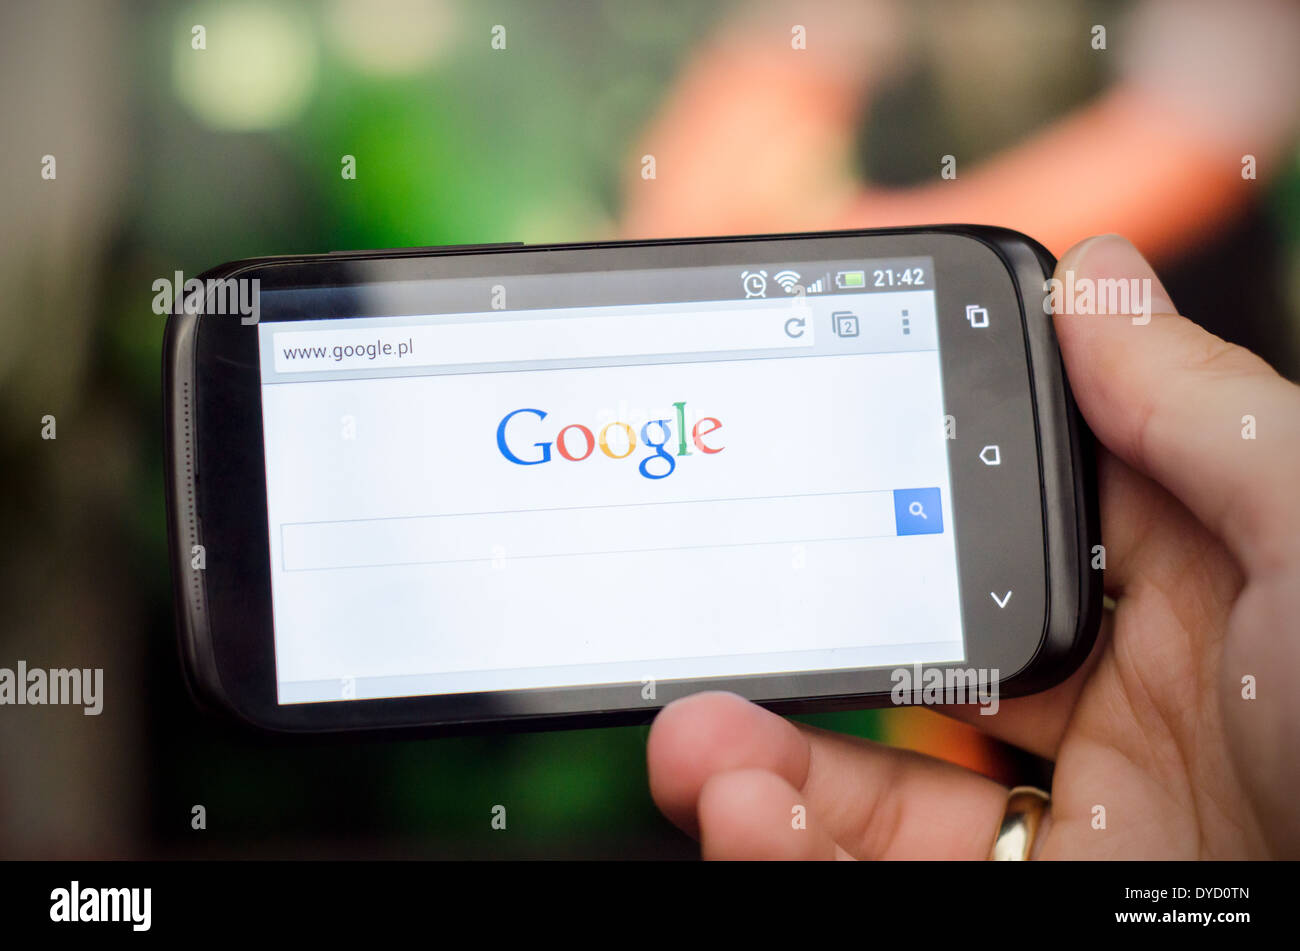 Smartphone with Google search website Stock Photo